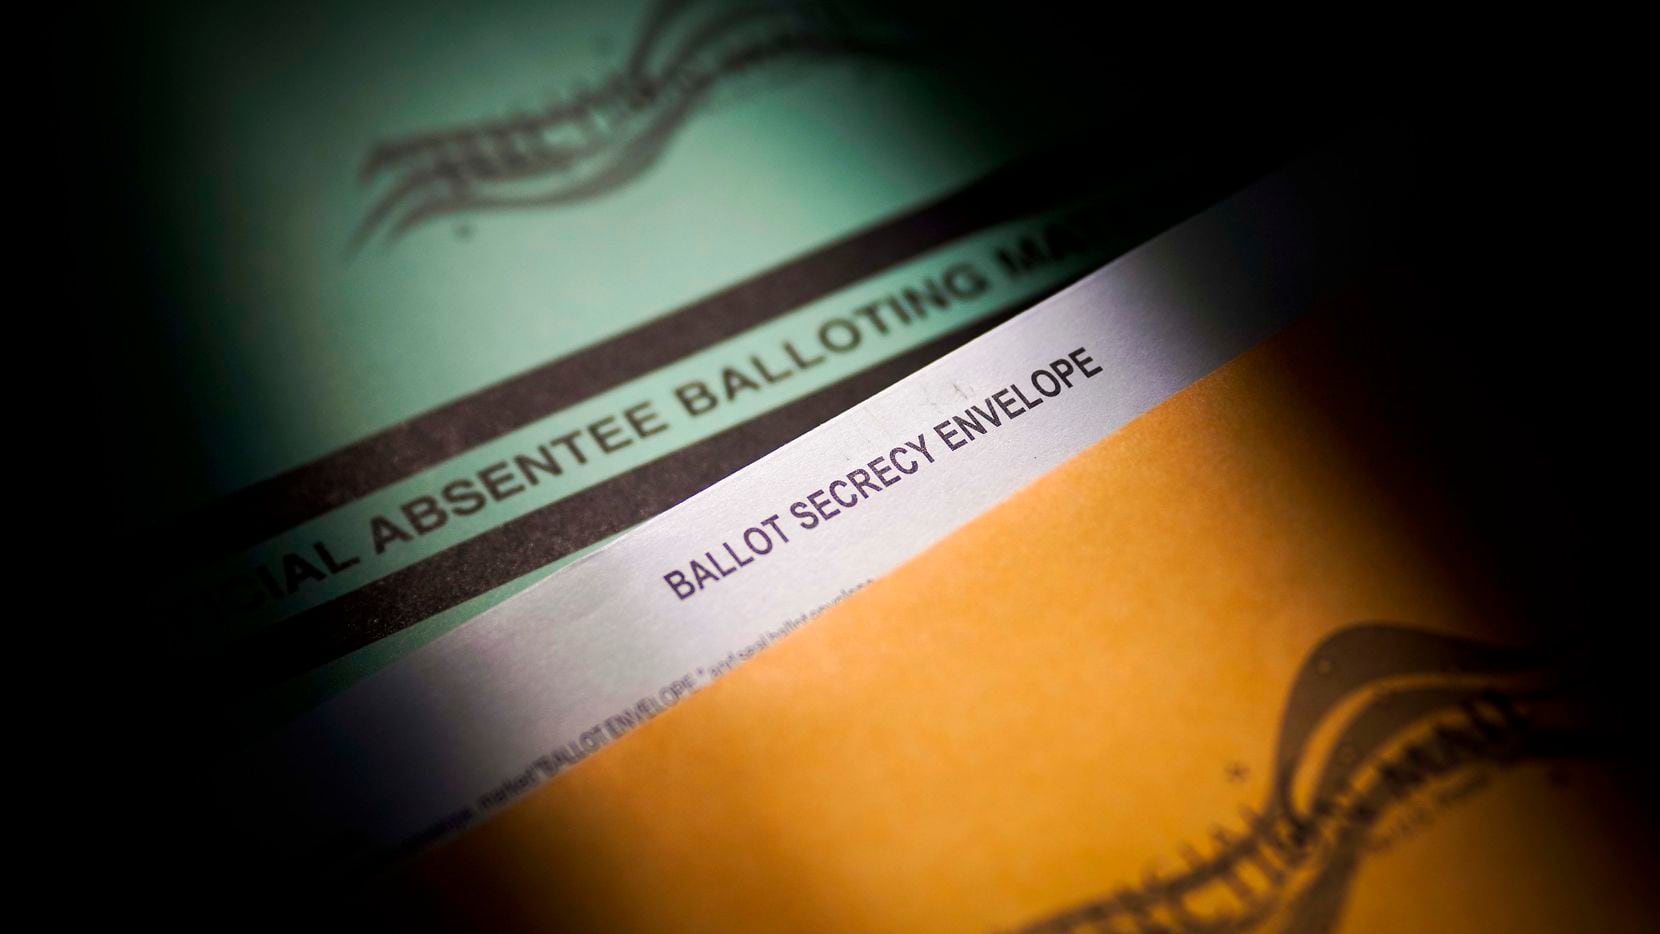 Mail-in absentee ballot materials photographed at the Dallas County Elections Department on...